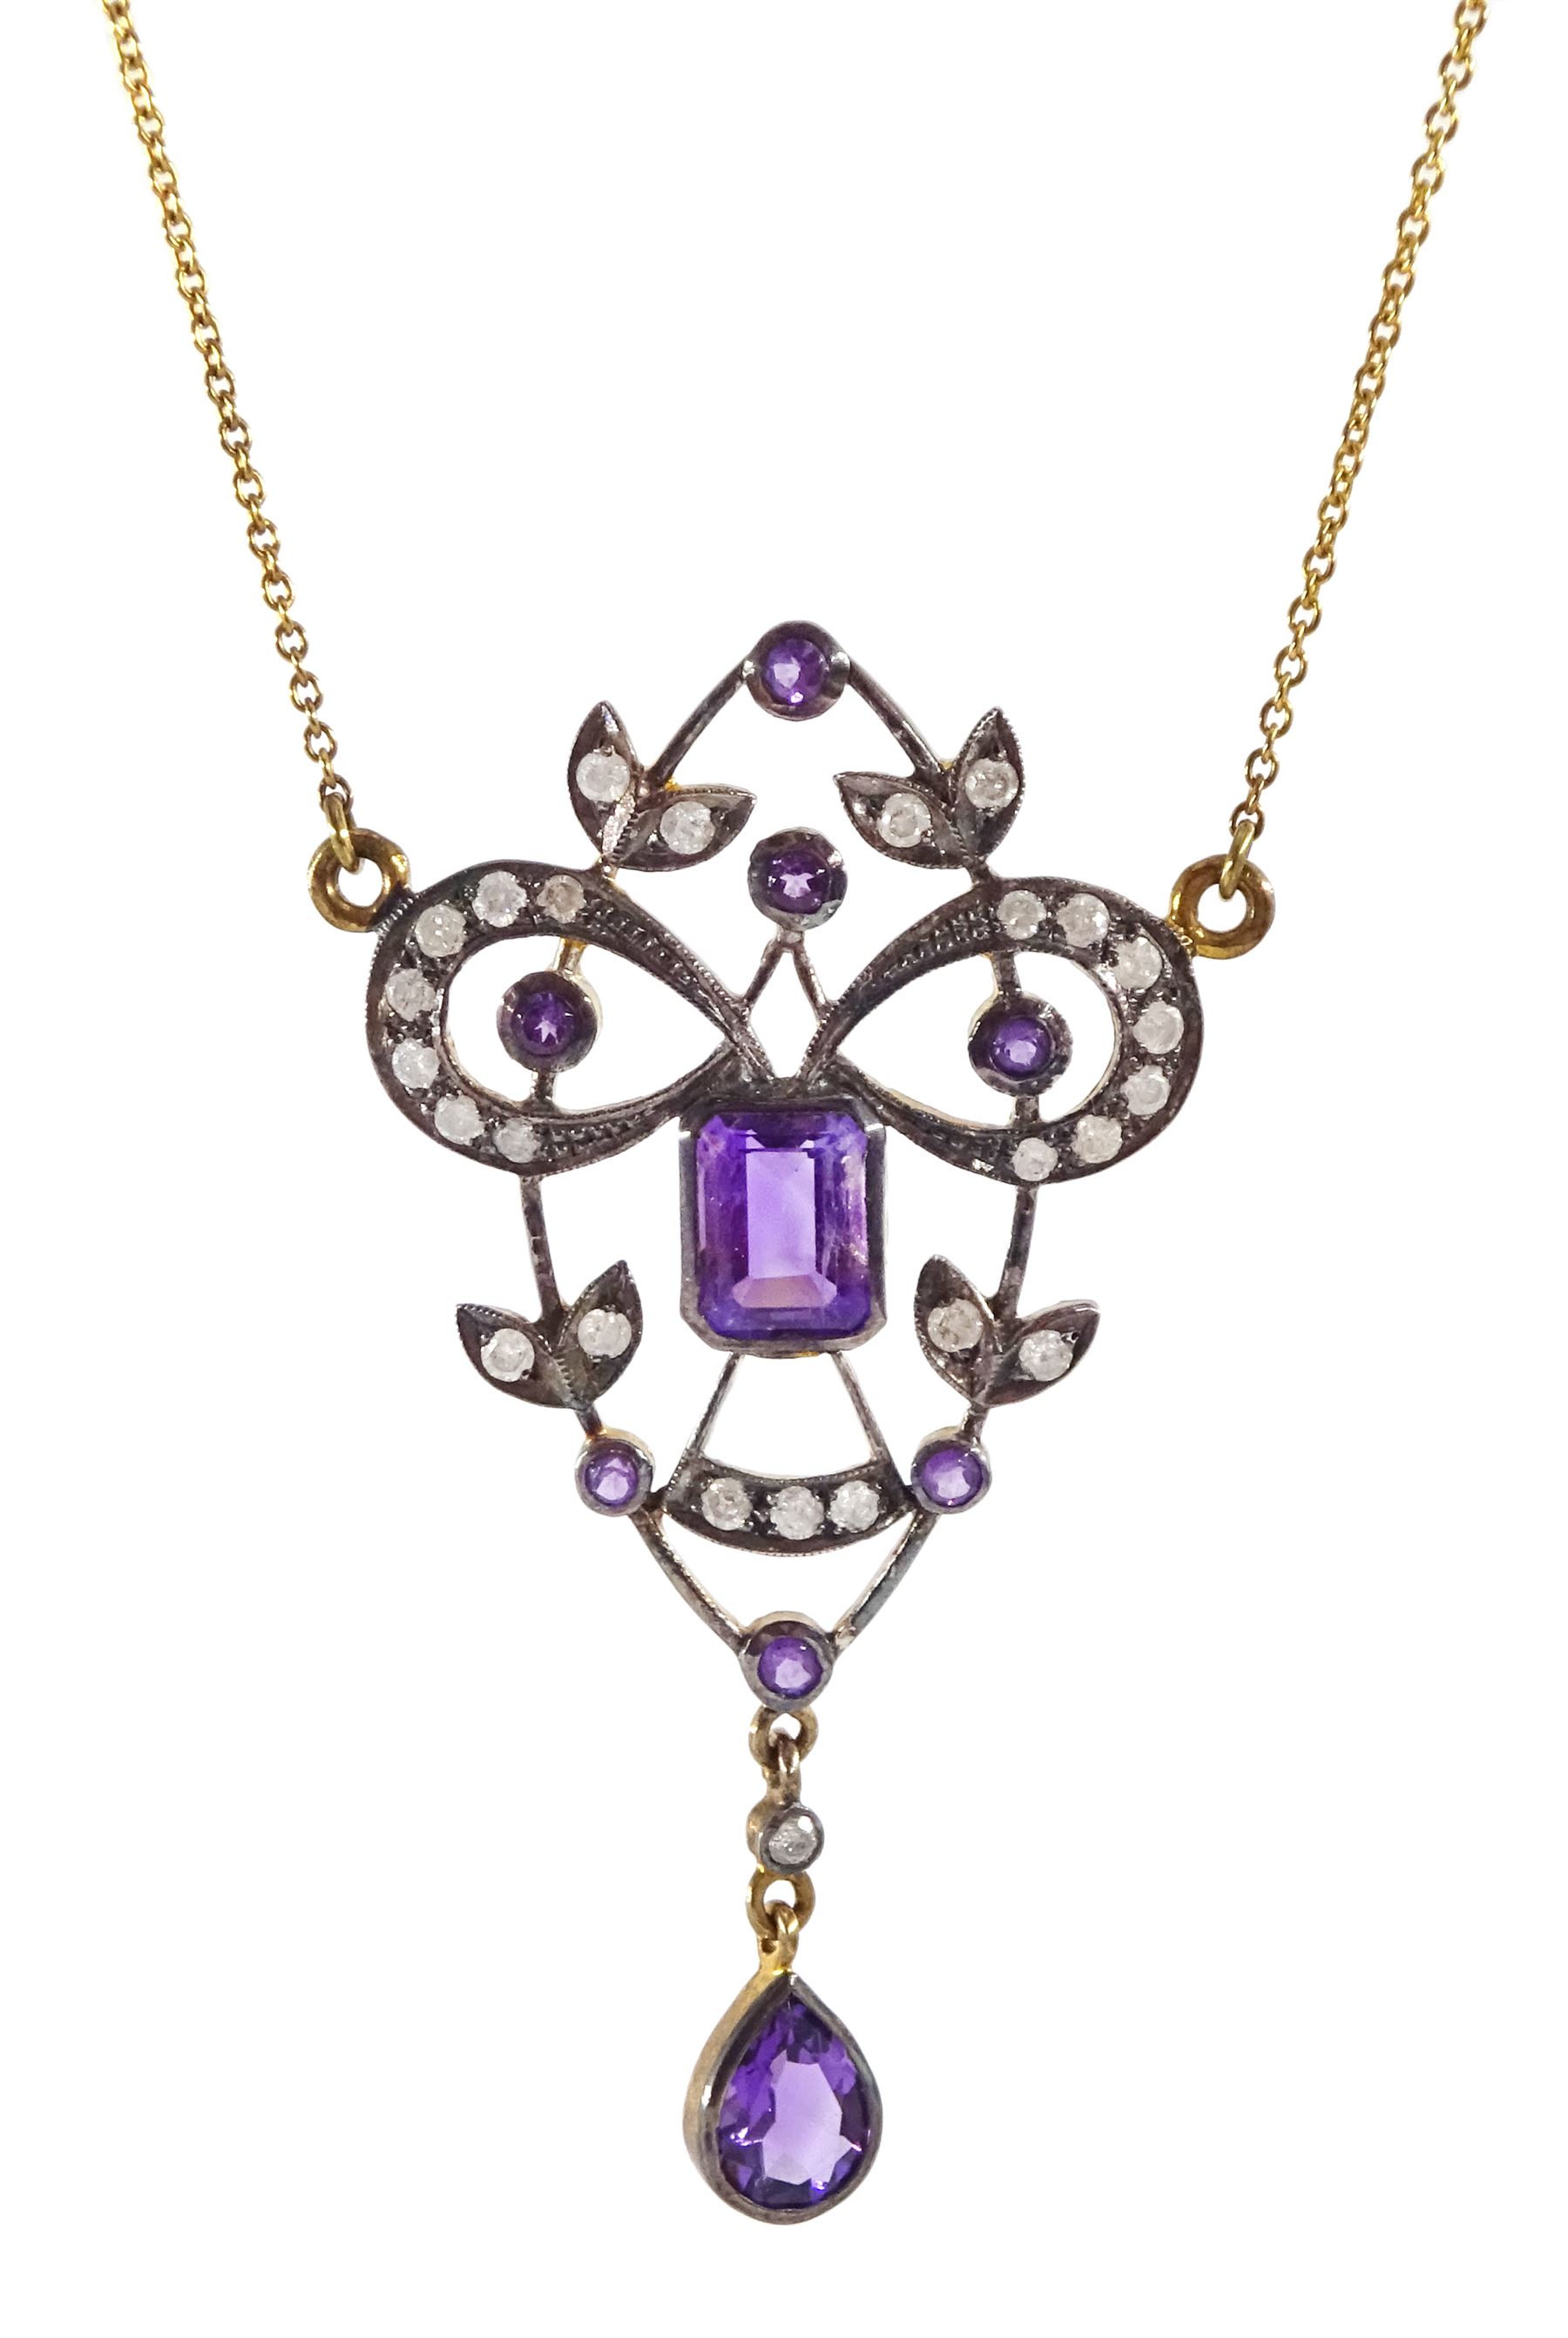 Gold and silver amethyst and diamond pendant necklace